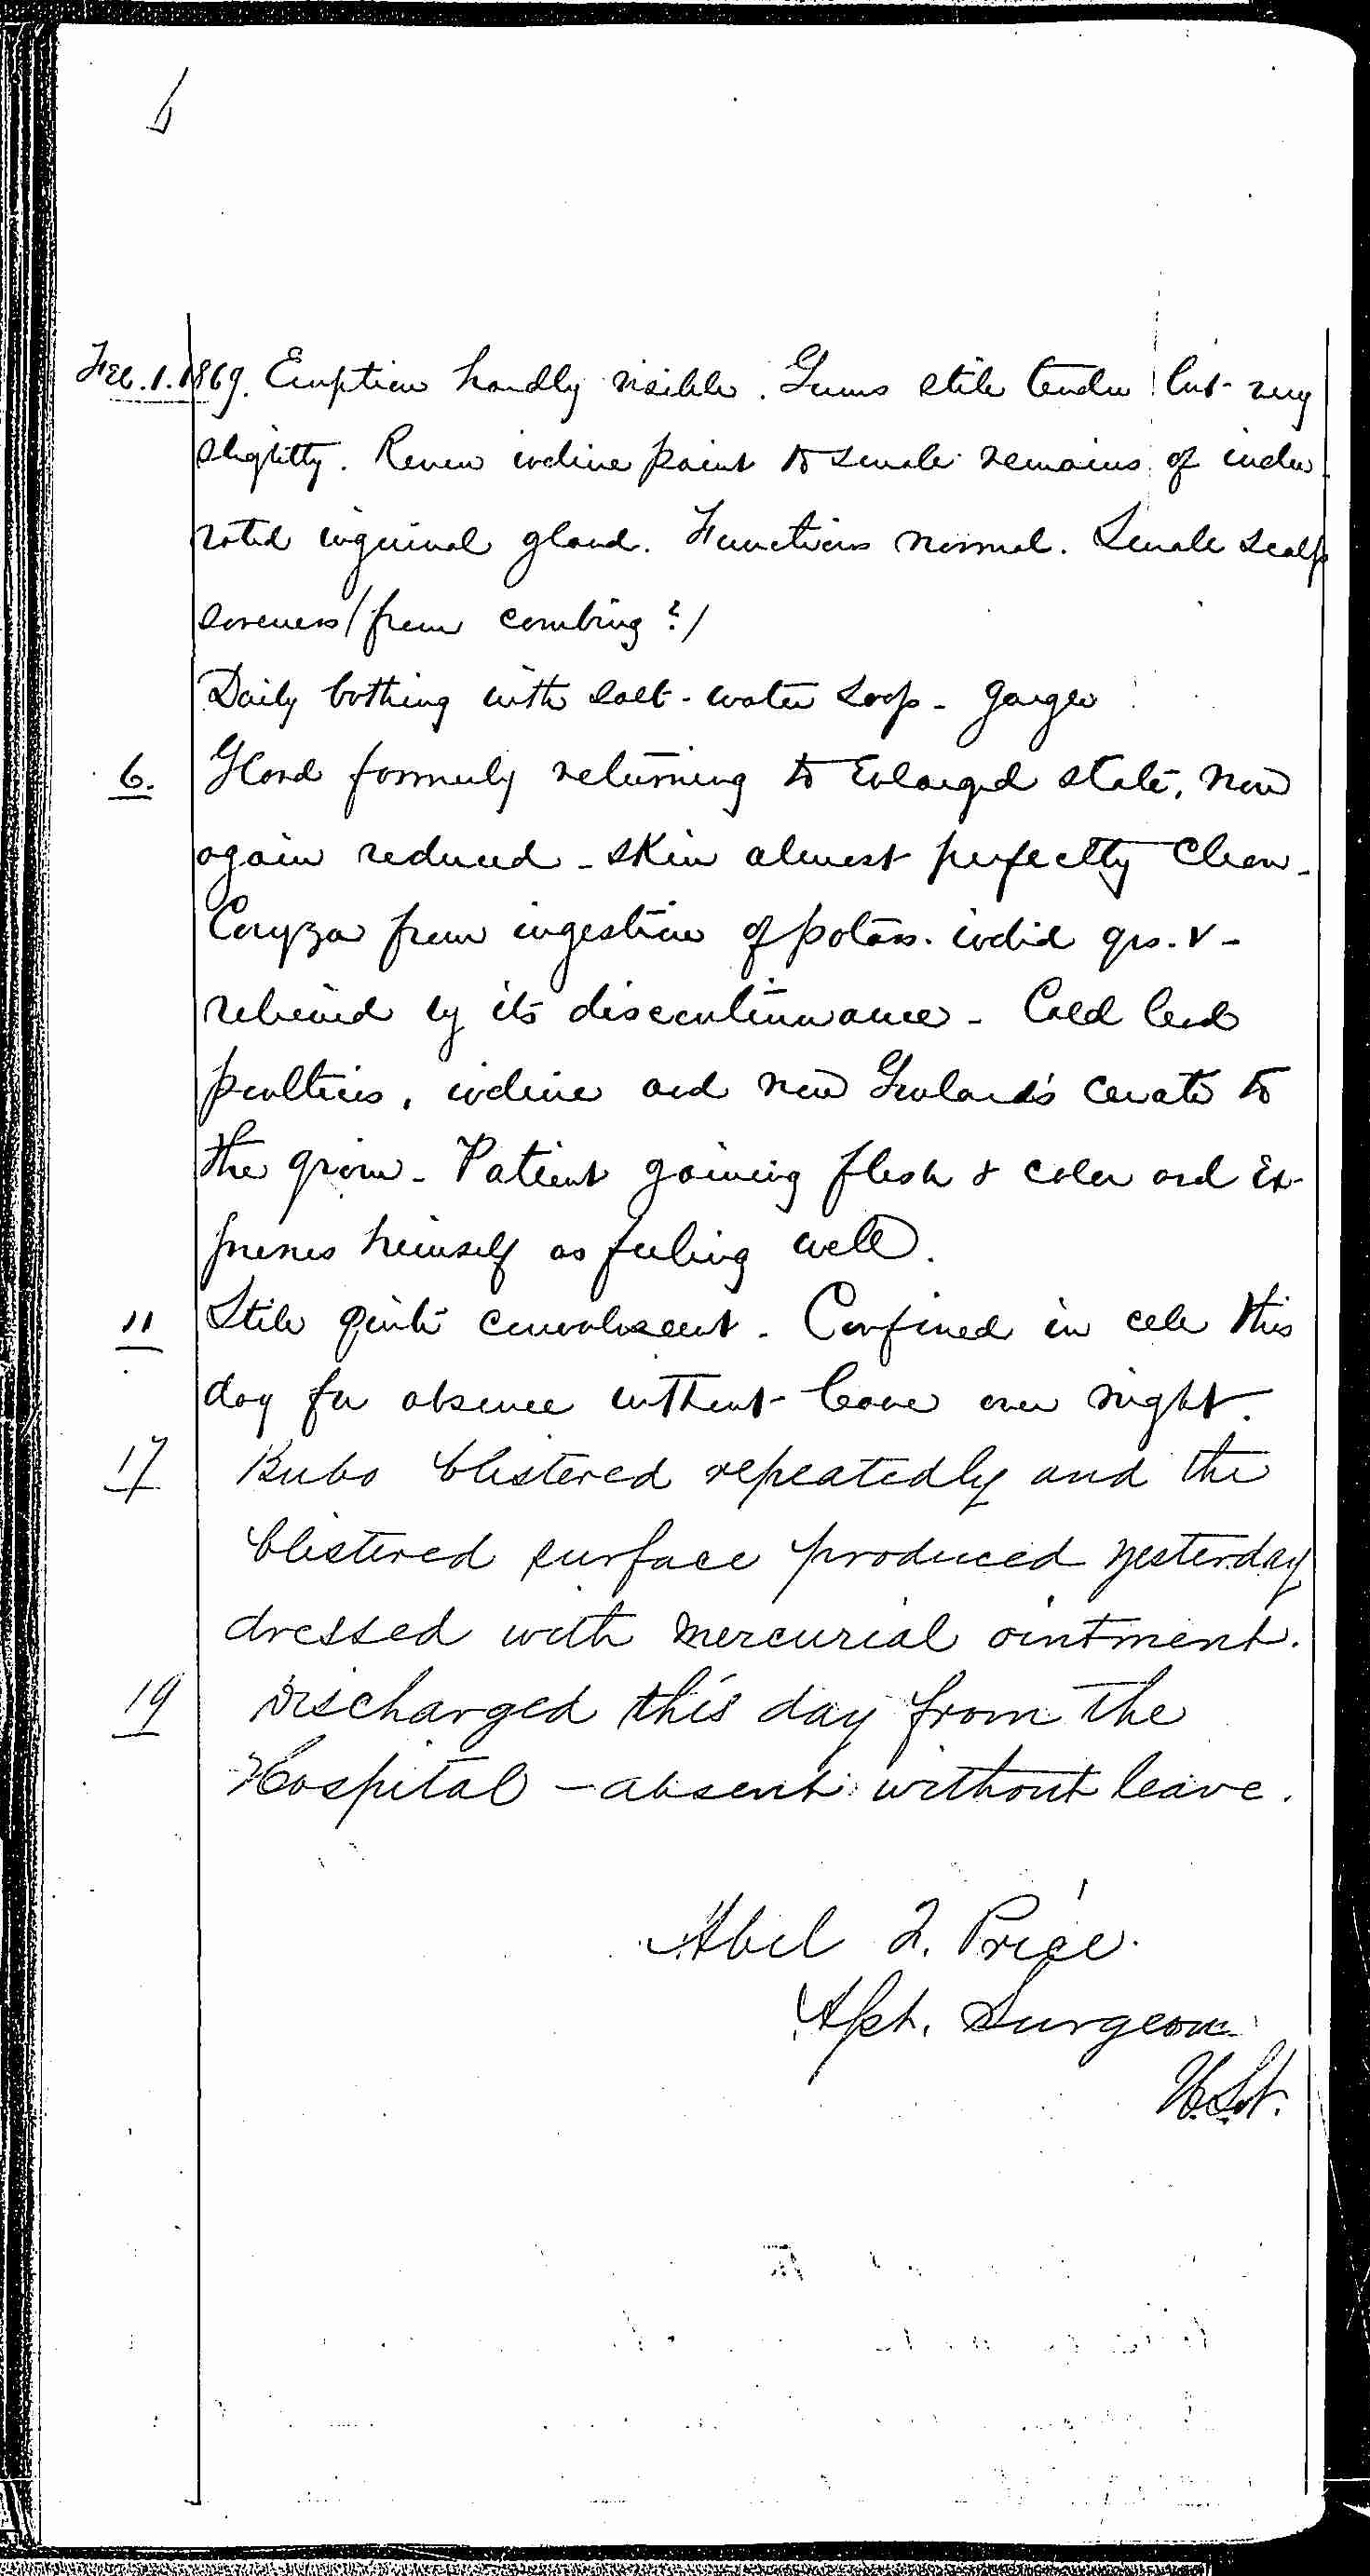 Entry for Eugene Smith (page 6 of 6) in the log Hospital Tickets and Case Papers - Naval Hospital - Washington, D.C. - 1868-69